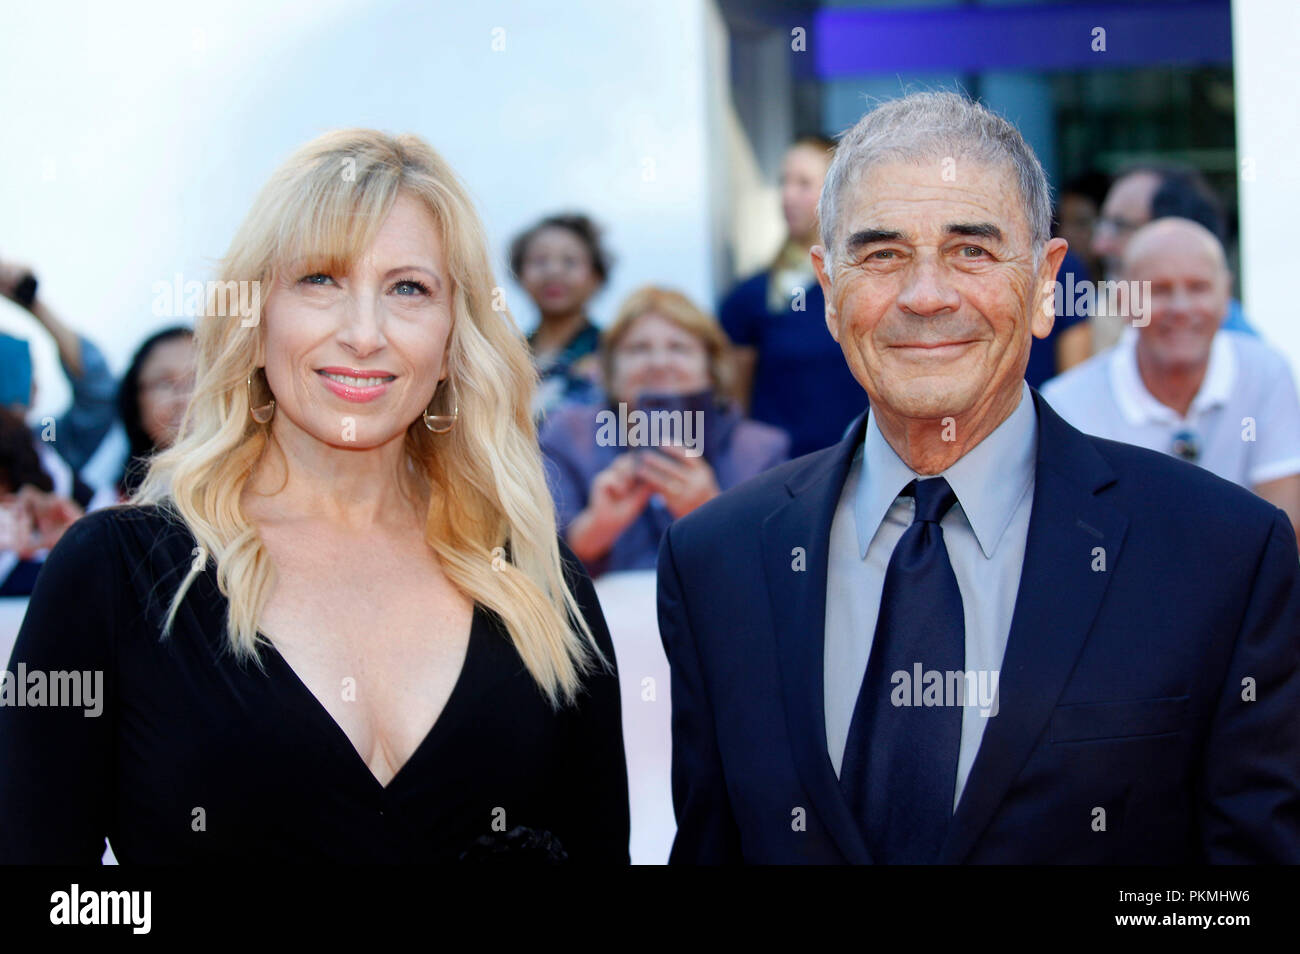 Robert Forster and his wife Evie Forster attending the 'What They Had' premiere during the 2018 Toronto International Film Festival at Roy Thomson Hall on September 12, 2018 in Toronto, Canada. Stock Photo